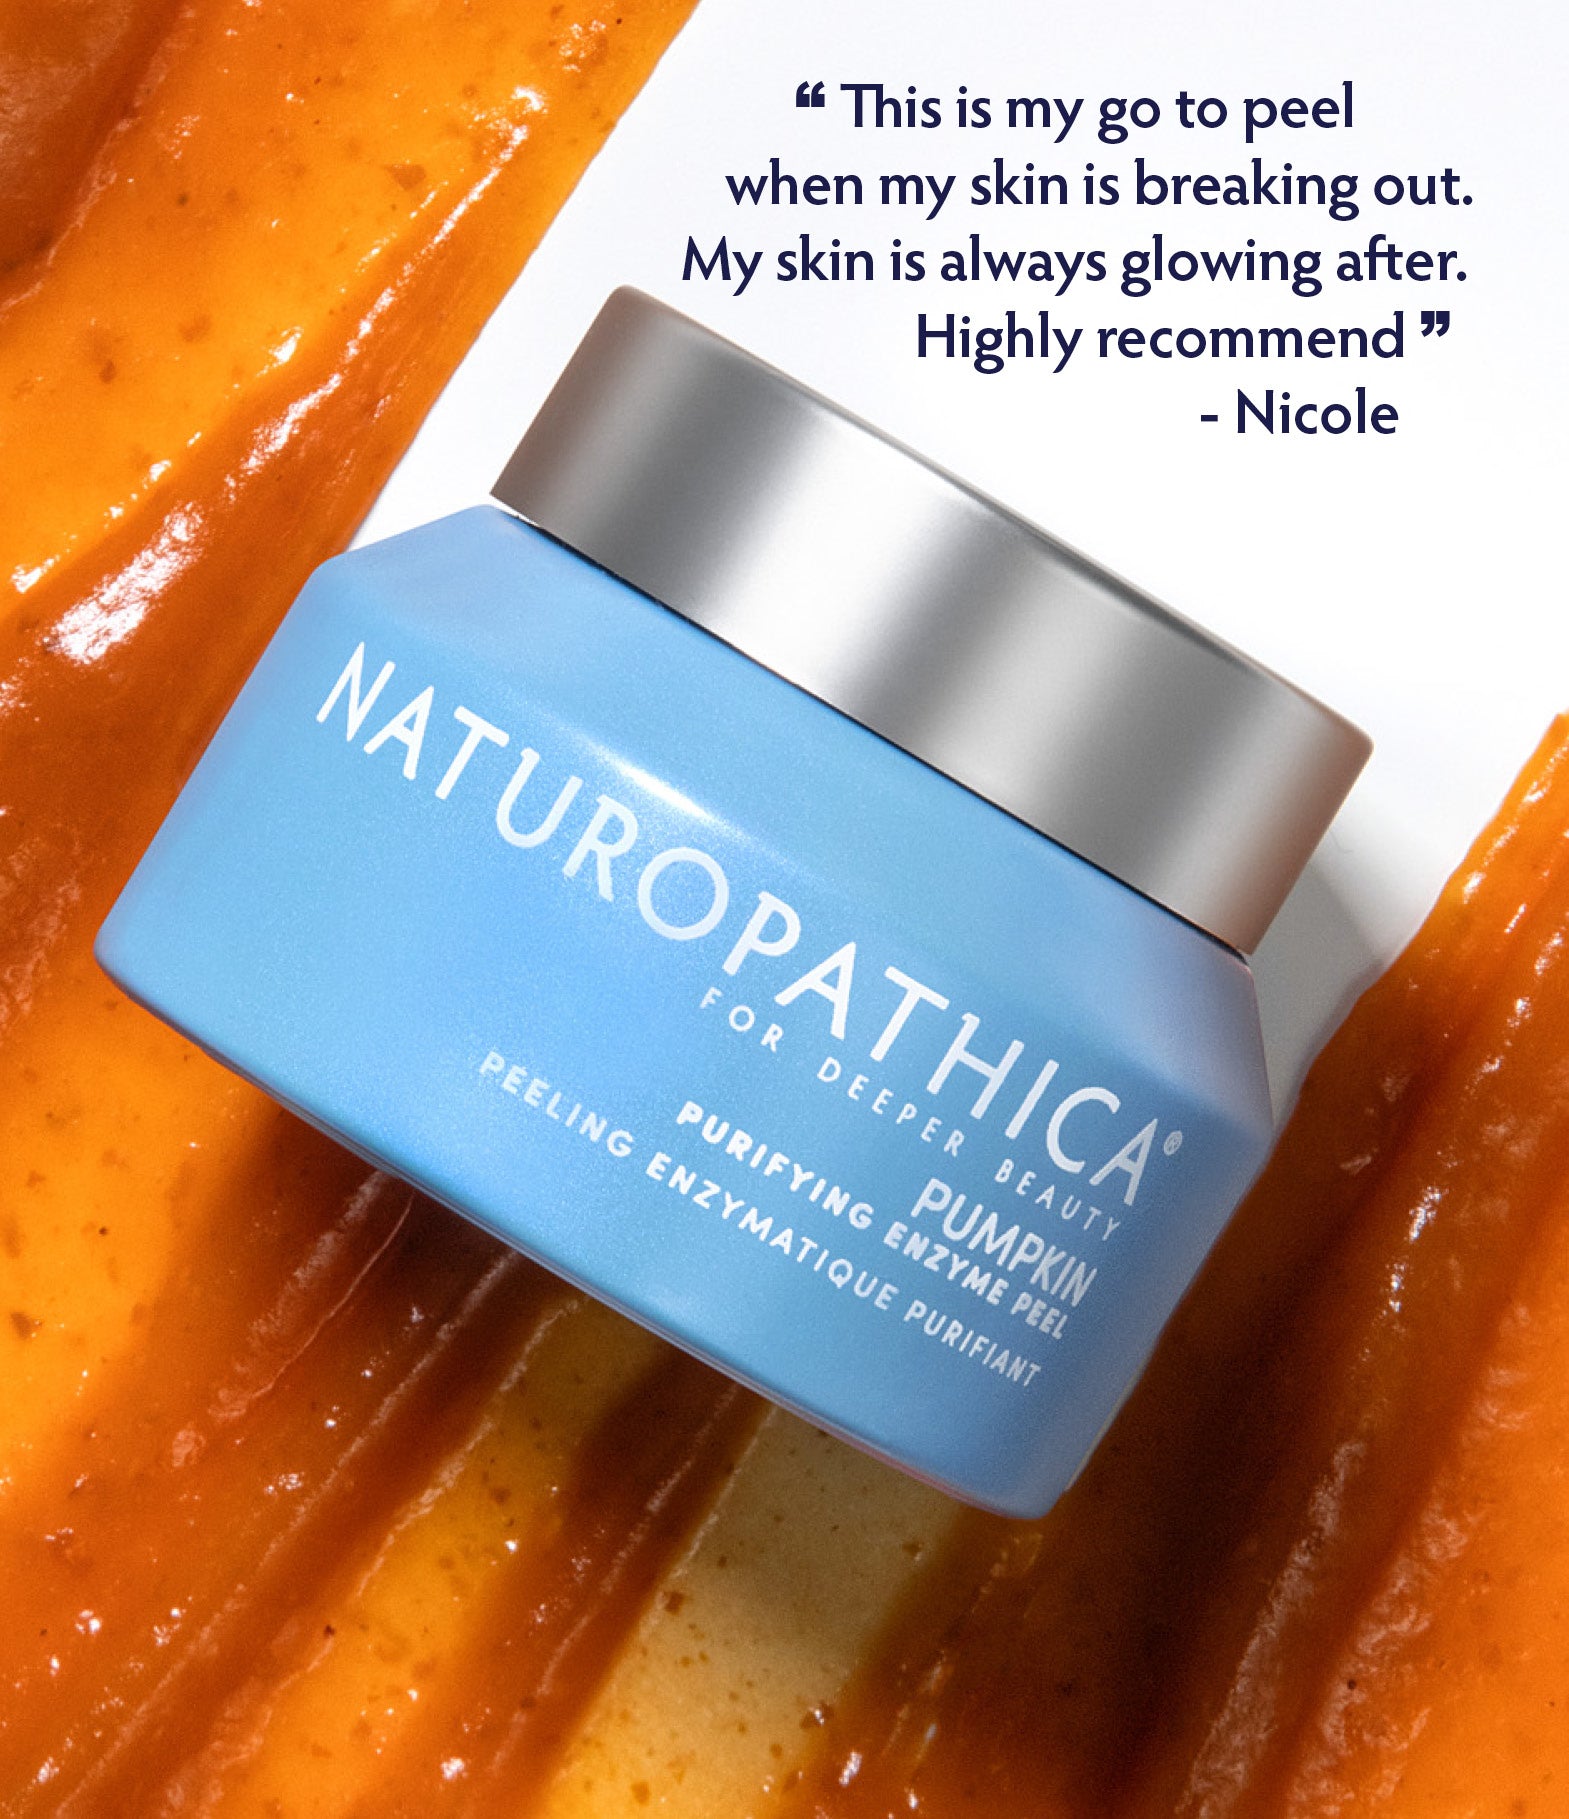 Pumpkin Purifying Enzyme Peel customer quote